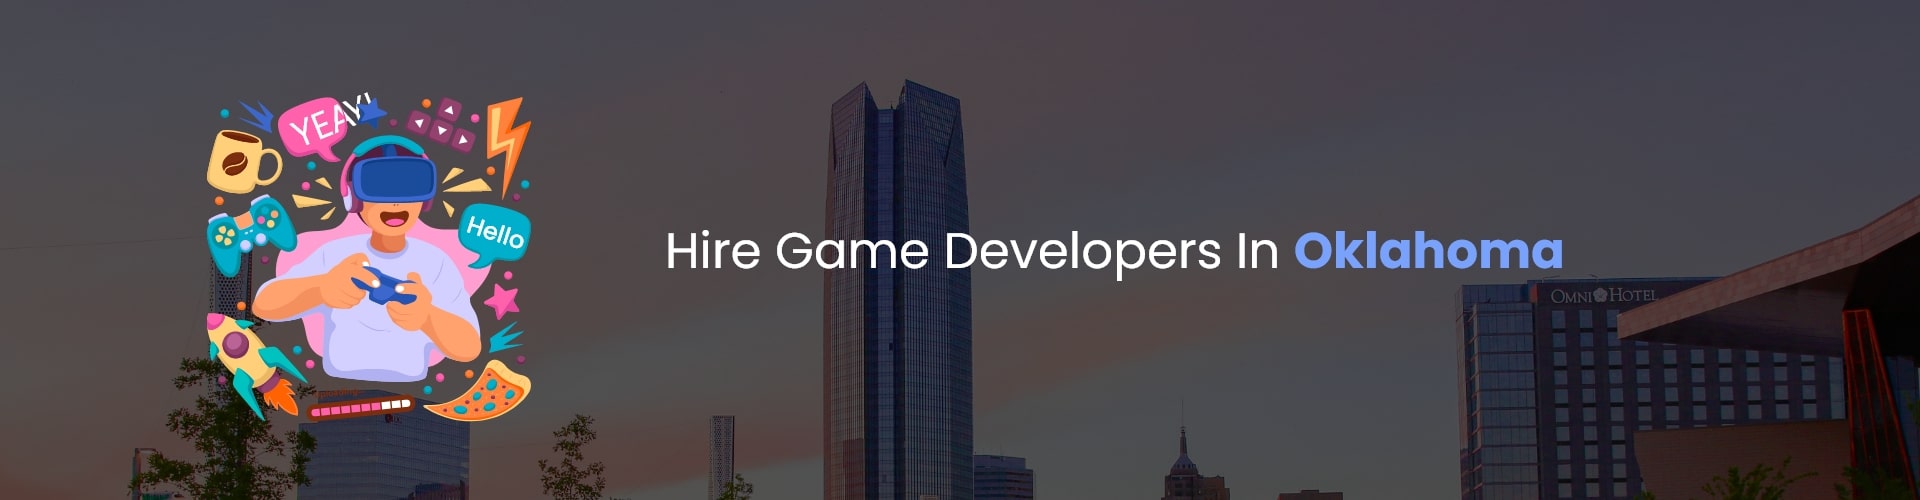 hire game developers in oklahoma